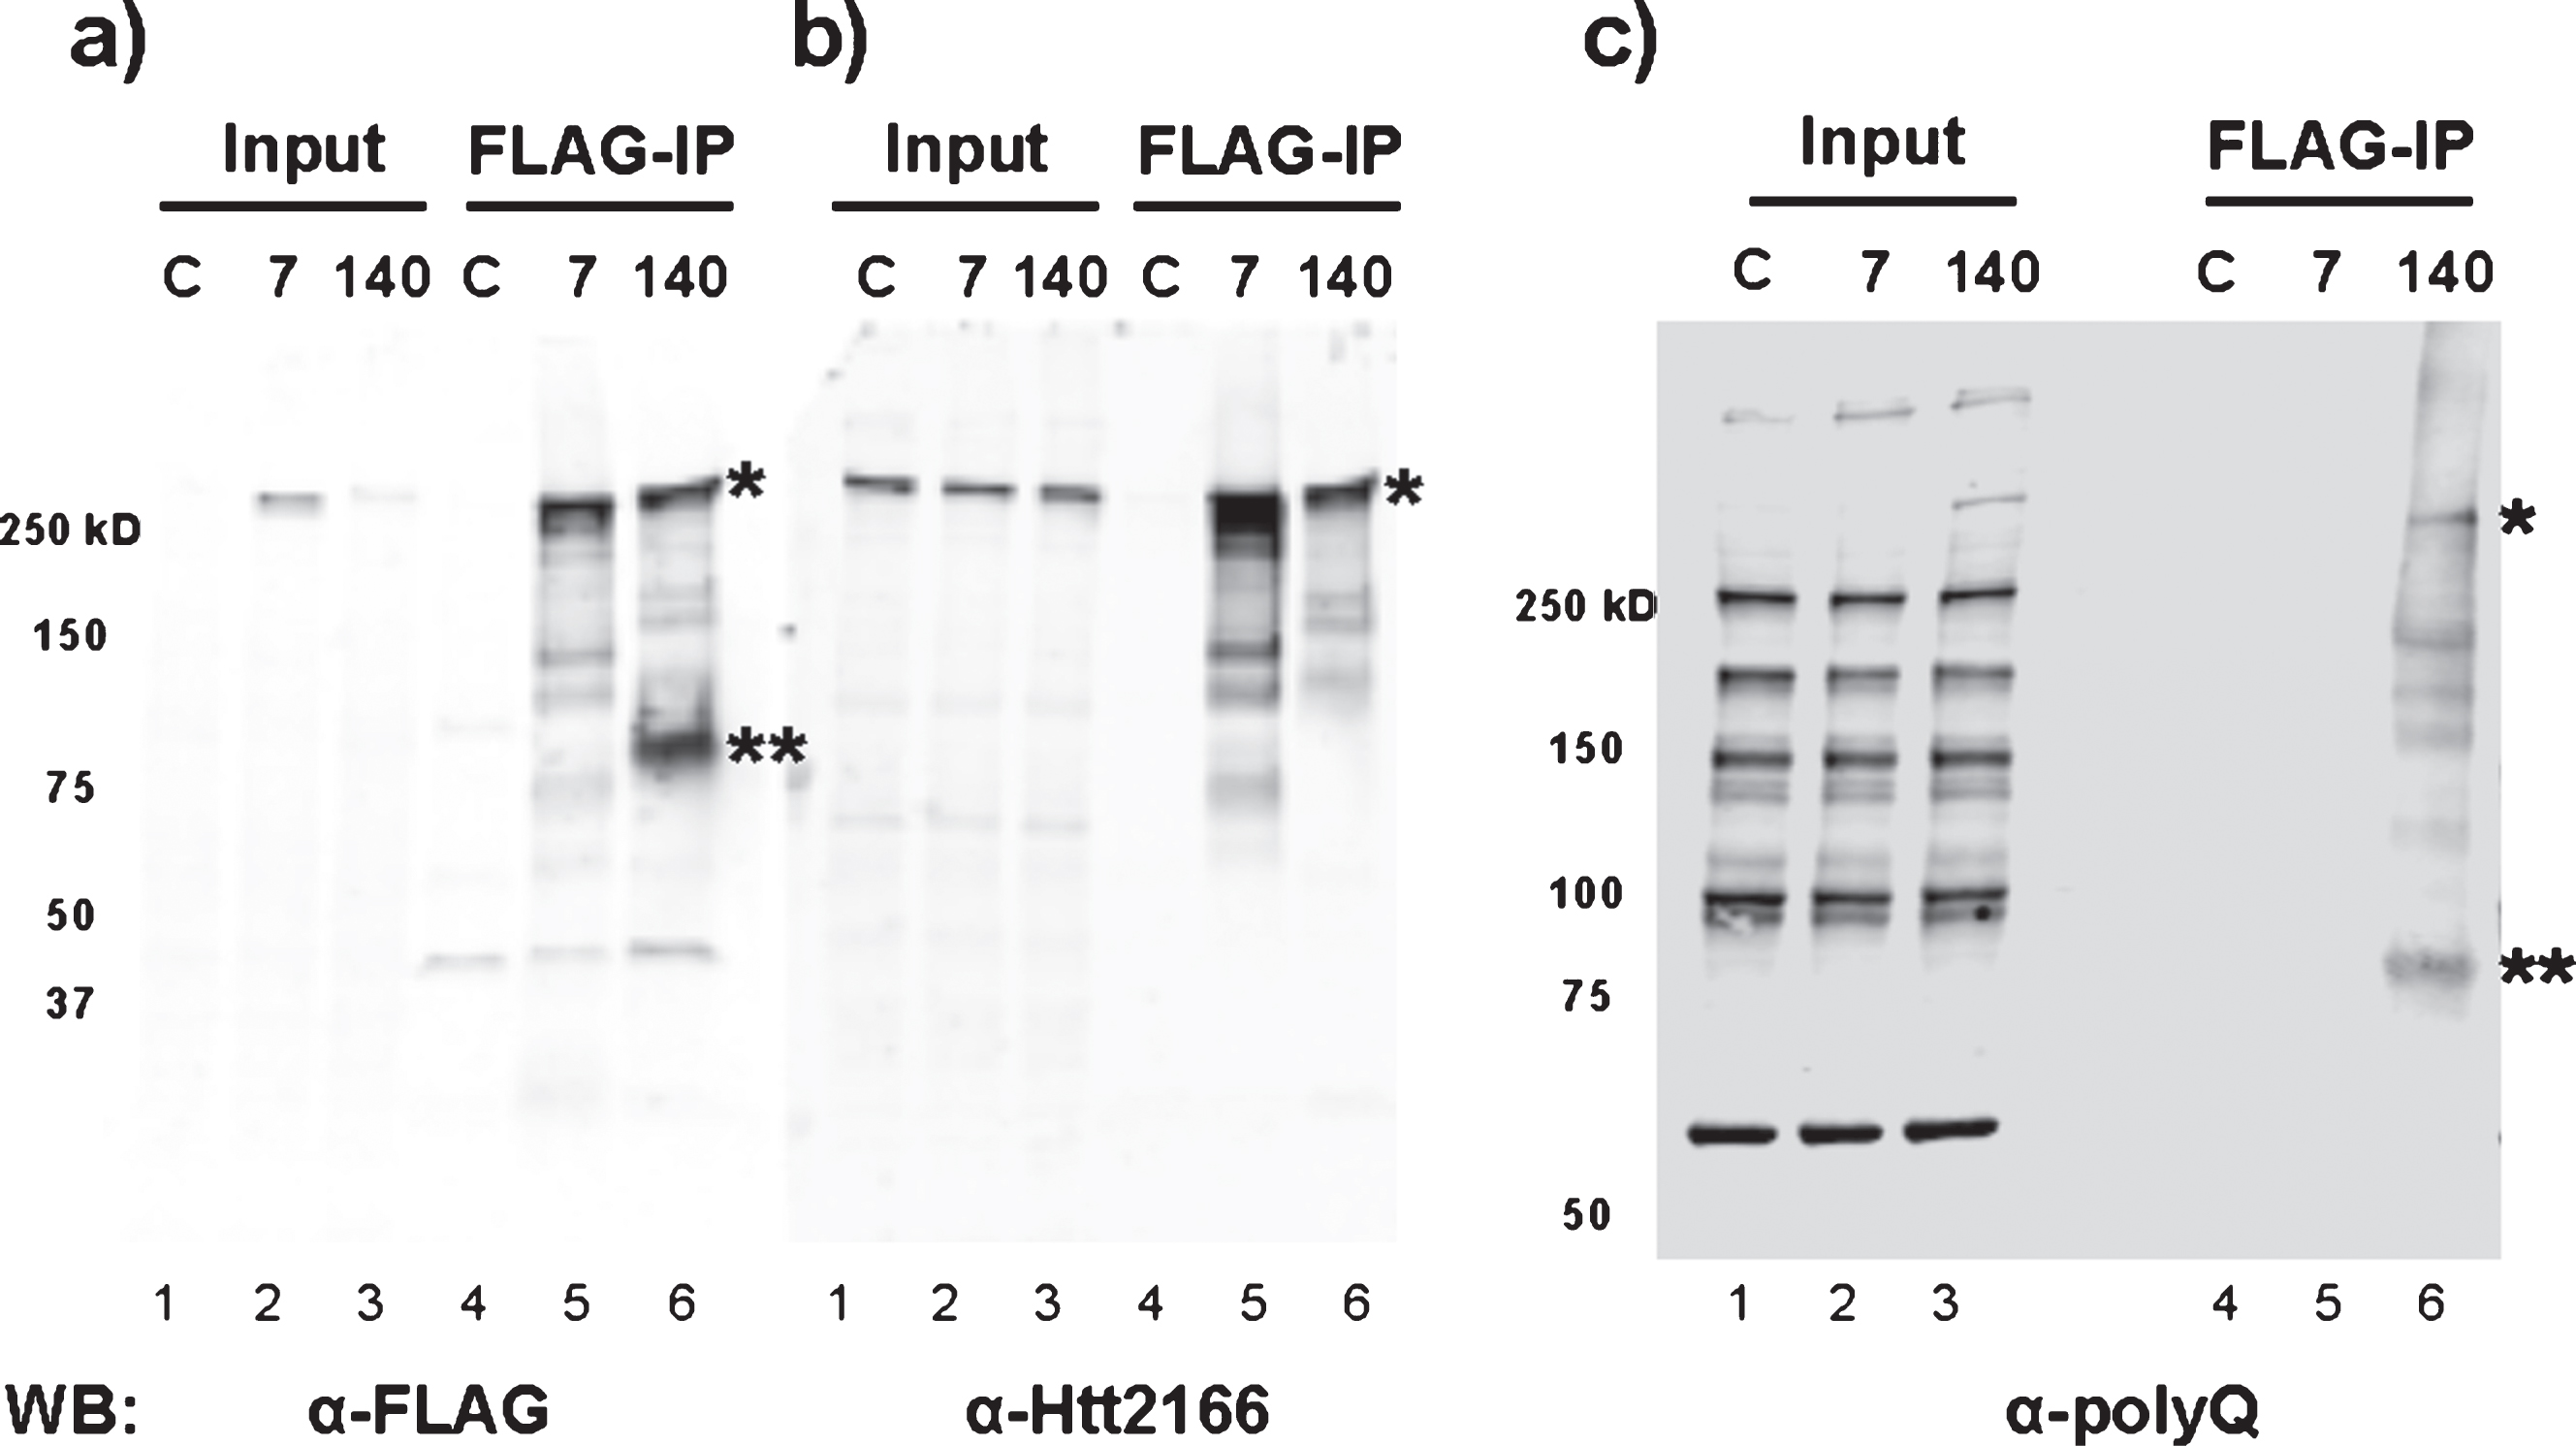 Pathogenic exon 1 Htt protein is only produced from mouse embryonic stem cells with expanded poly-glutamine tract. FLAG-IP was performed using total cell lysate extracted from wild-type (C), 3xFLAG-Htt7Q/7Q (7), and 3xFLAG-Htt140Q/7Q (140) mouse embryonic stem cells. Immunoblotting was performed with a) FLAG, b) Htt2166, and c) polyQ (3B5H10 clone) antibodies. The full-length 3xFLAG-tagged mutant Htt 140Q protein is detected with all three antibodies (*). The mis-spliced Htt exon 1 protein (**) is detected by anti-FLAG and anti-polyQ antibodies, but not with anti-Htt2166 whose epitope falls outside of exon 1. The mobility of this protein is retarded by the polyQ tract; it does not migrate to the predicted molecular weight. The western blots in panels a and b are from one gel run with duplicate samples, and the western blot in panel c is from a separate gel loaded with the same sample set. Both are 4–15% polyacrylamide gradient gels.